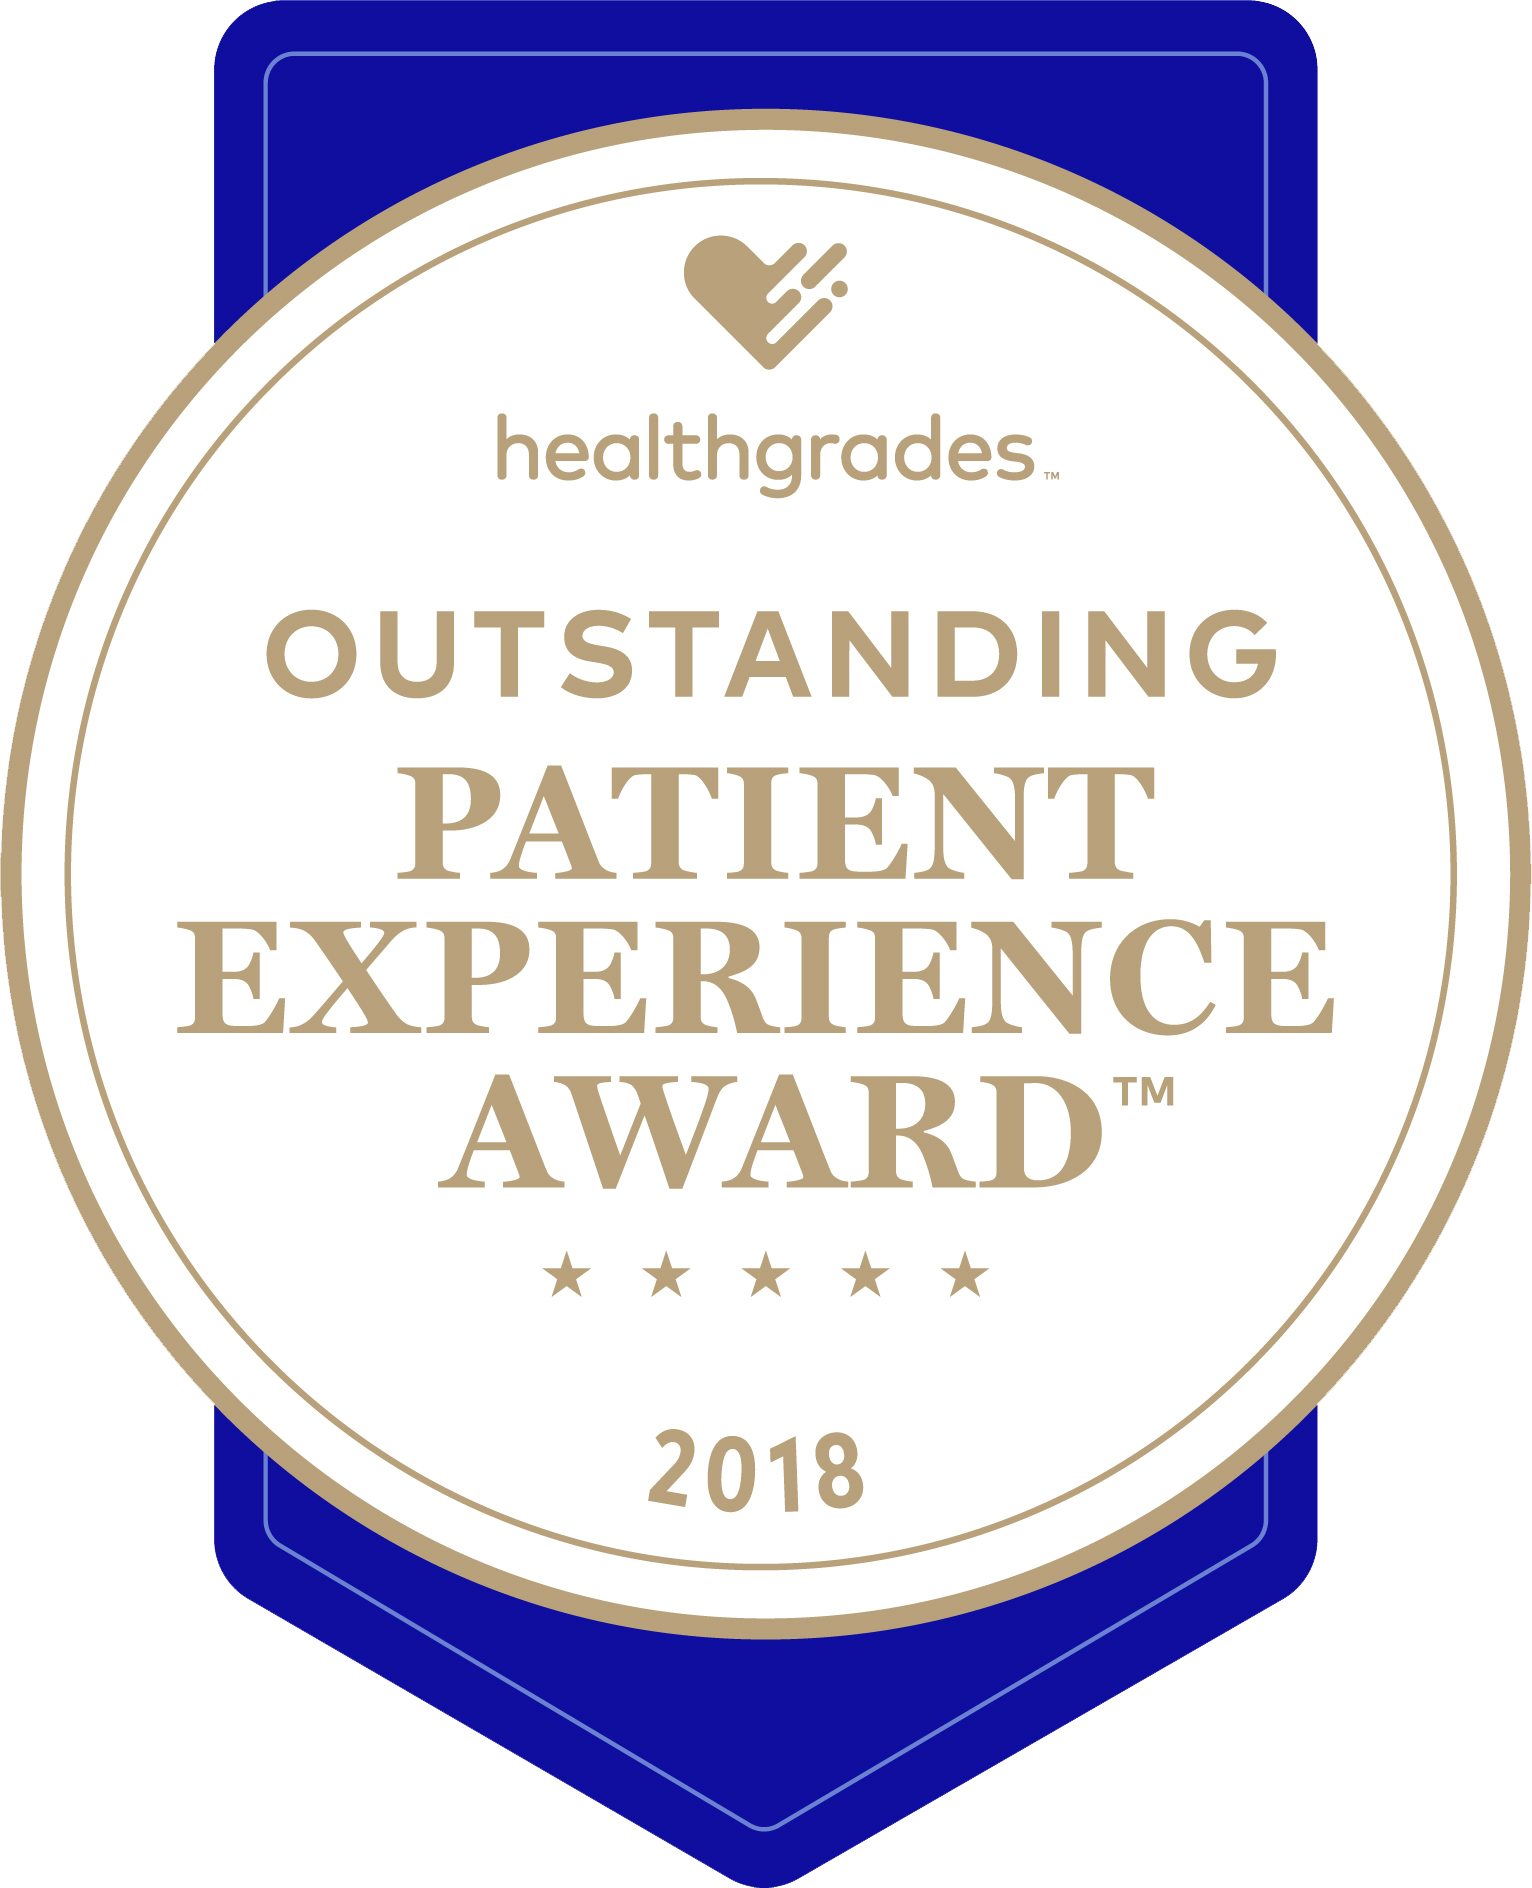 Outstanding Patient Experience Award 2018